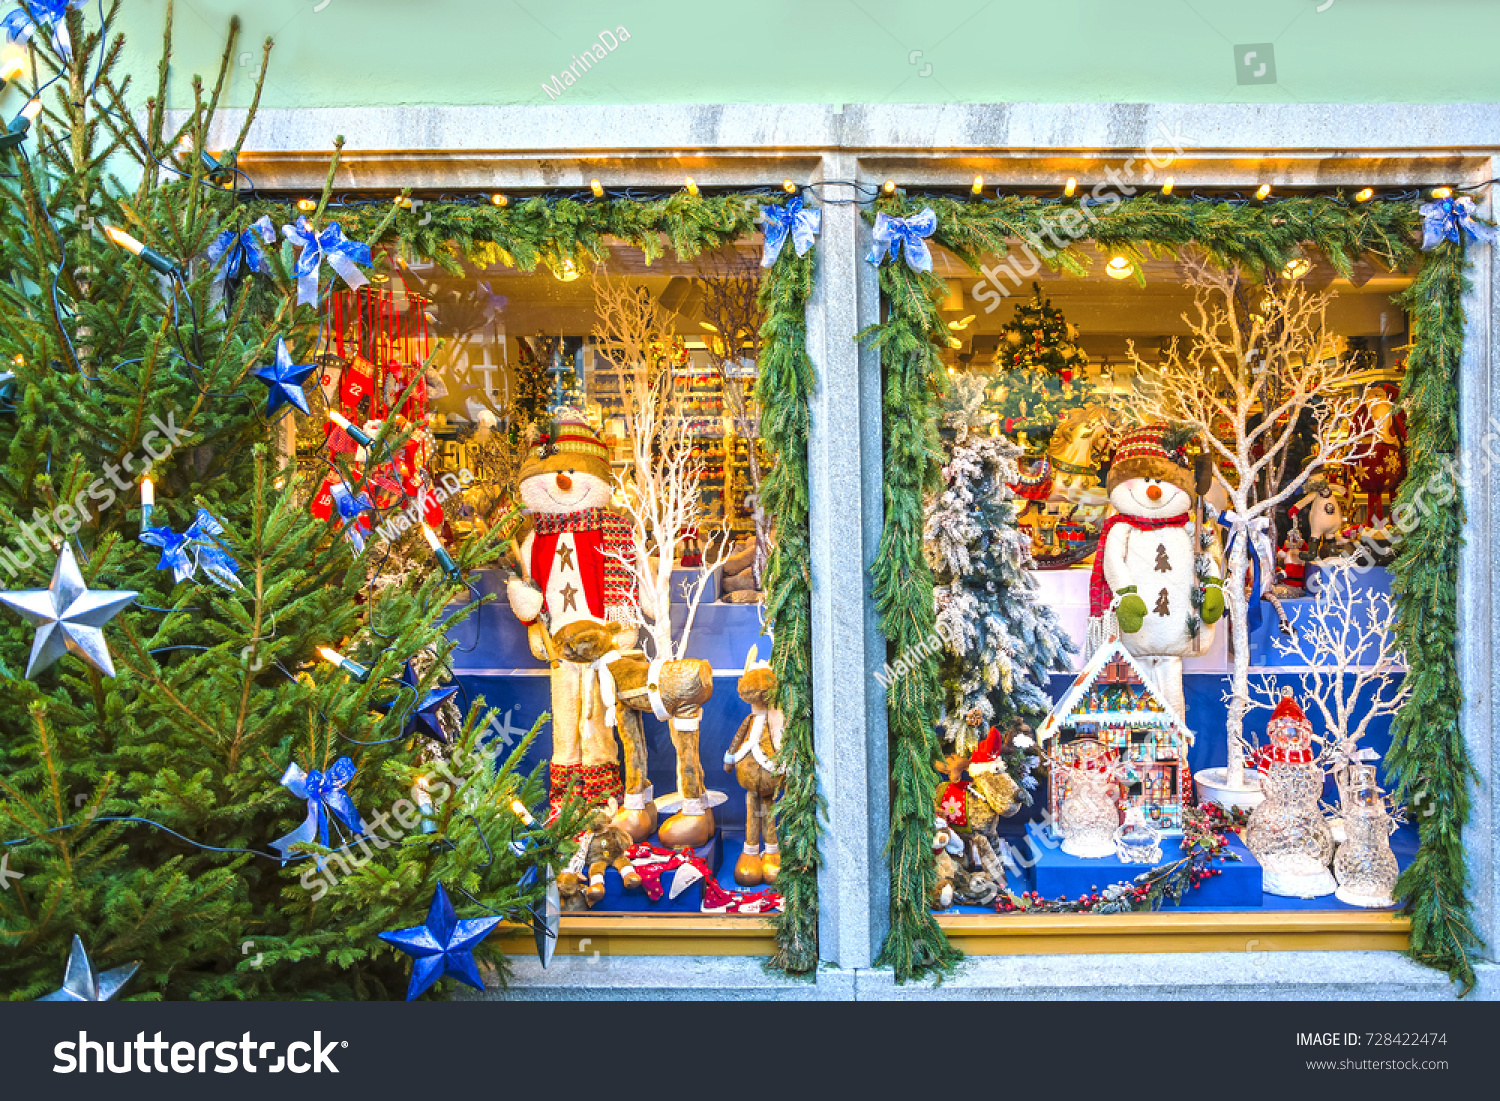 ROTHENBURG OB DER TAUBER, GERMANY - December 13, 2016:
Showcase decorated for Christmas holiday with traditional Christmas gifts in street of old fairytale town of Rothenburg ob der Tauber, Bavaria. #728422474